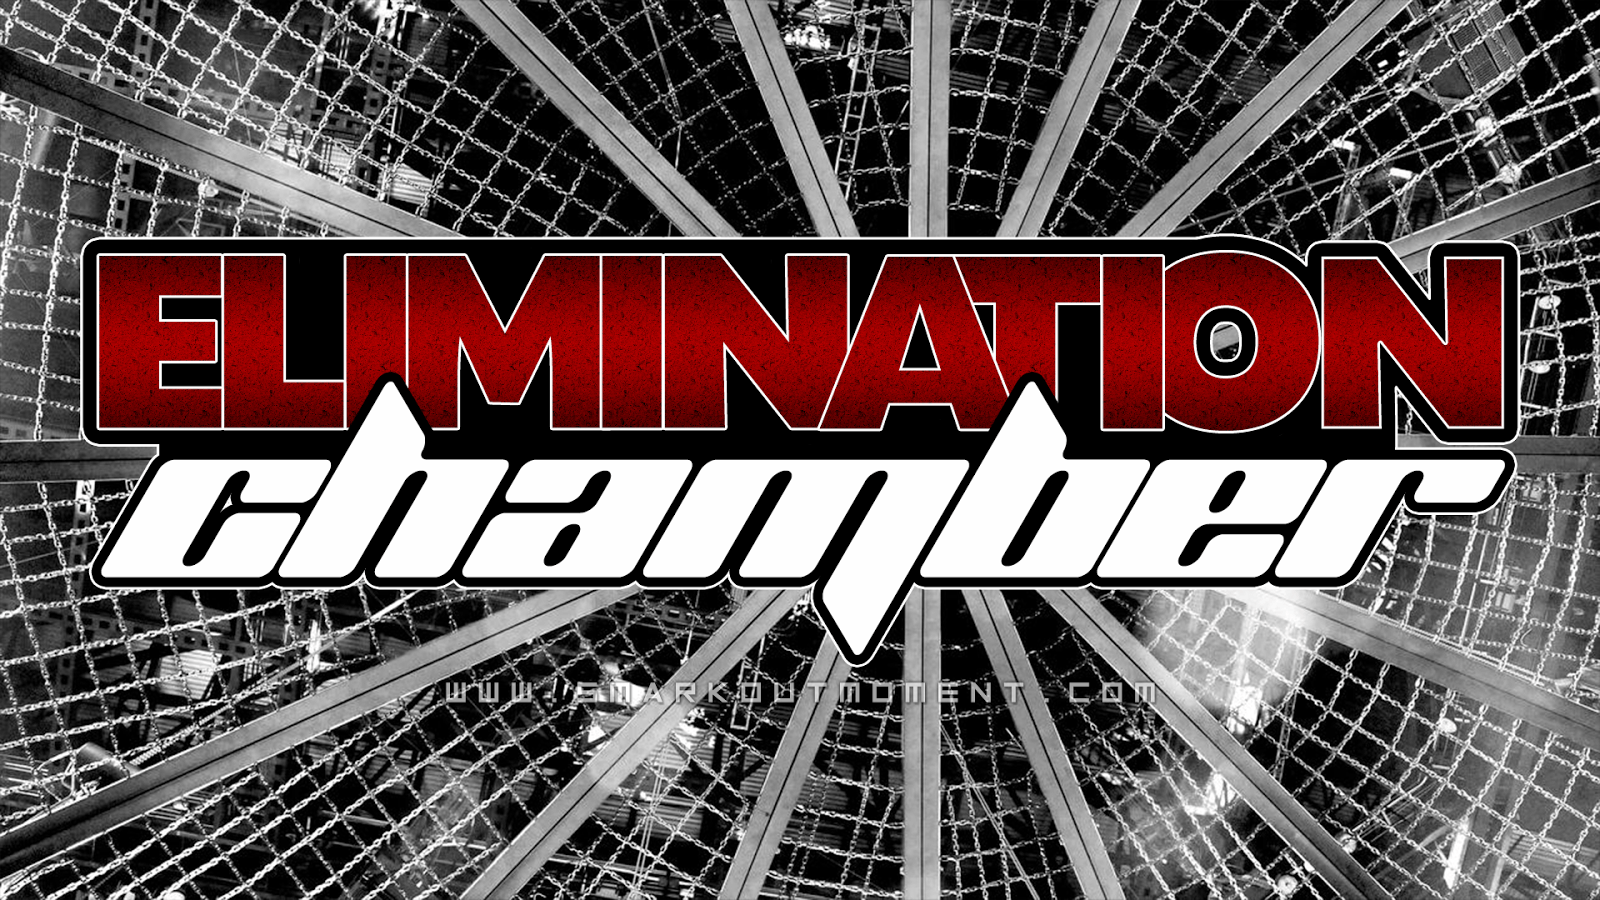 WWE Elimination Chamber PPV Wallpaper Posters and Logo Background